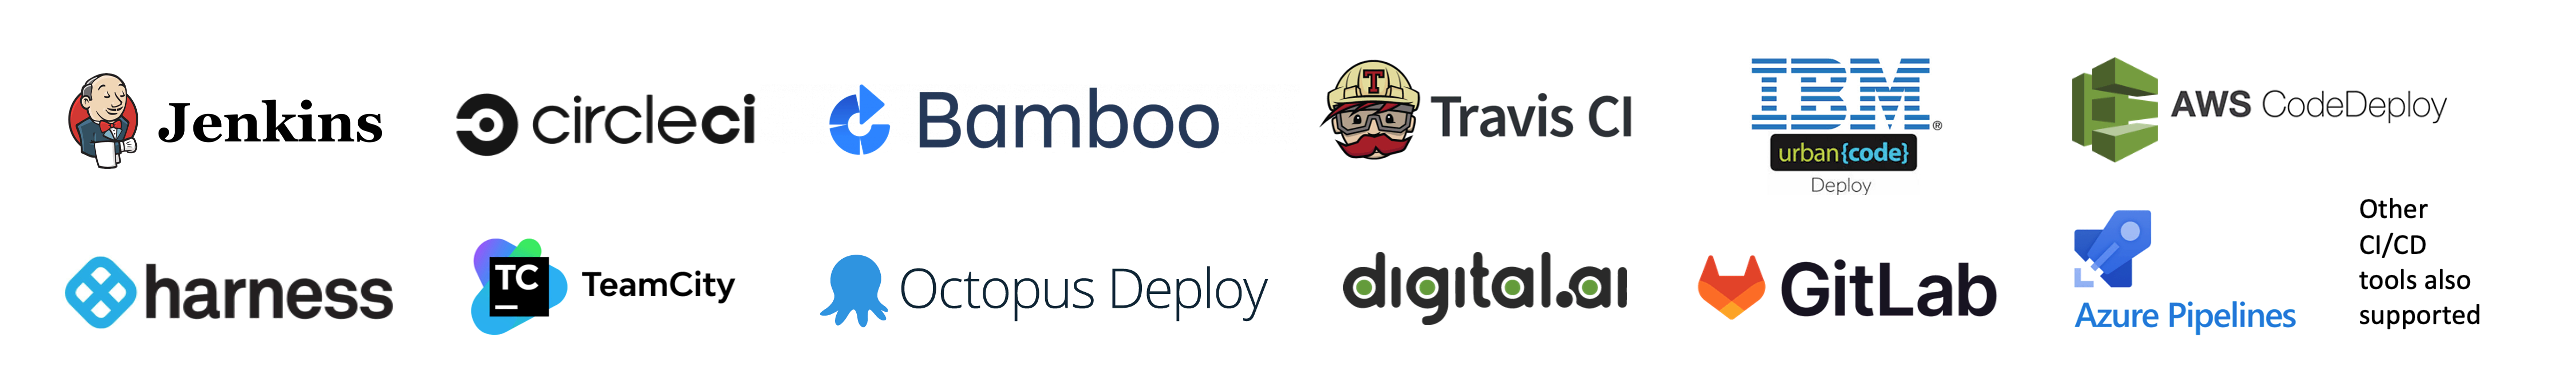 Logos for example CI/CD tools